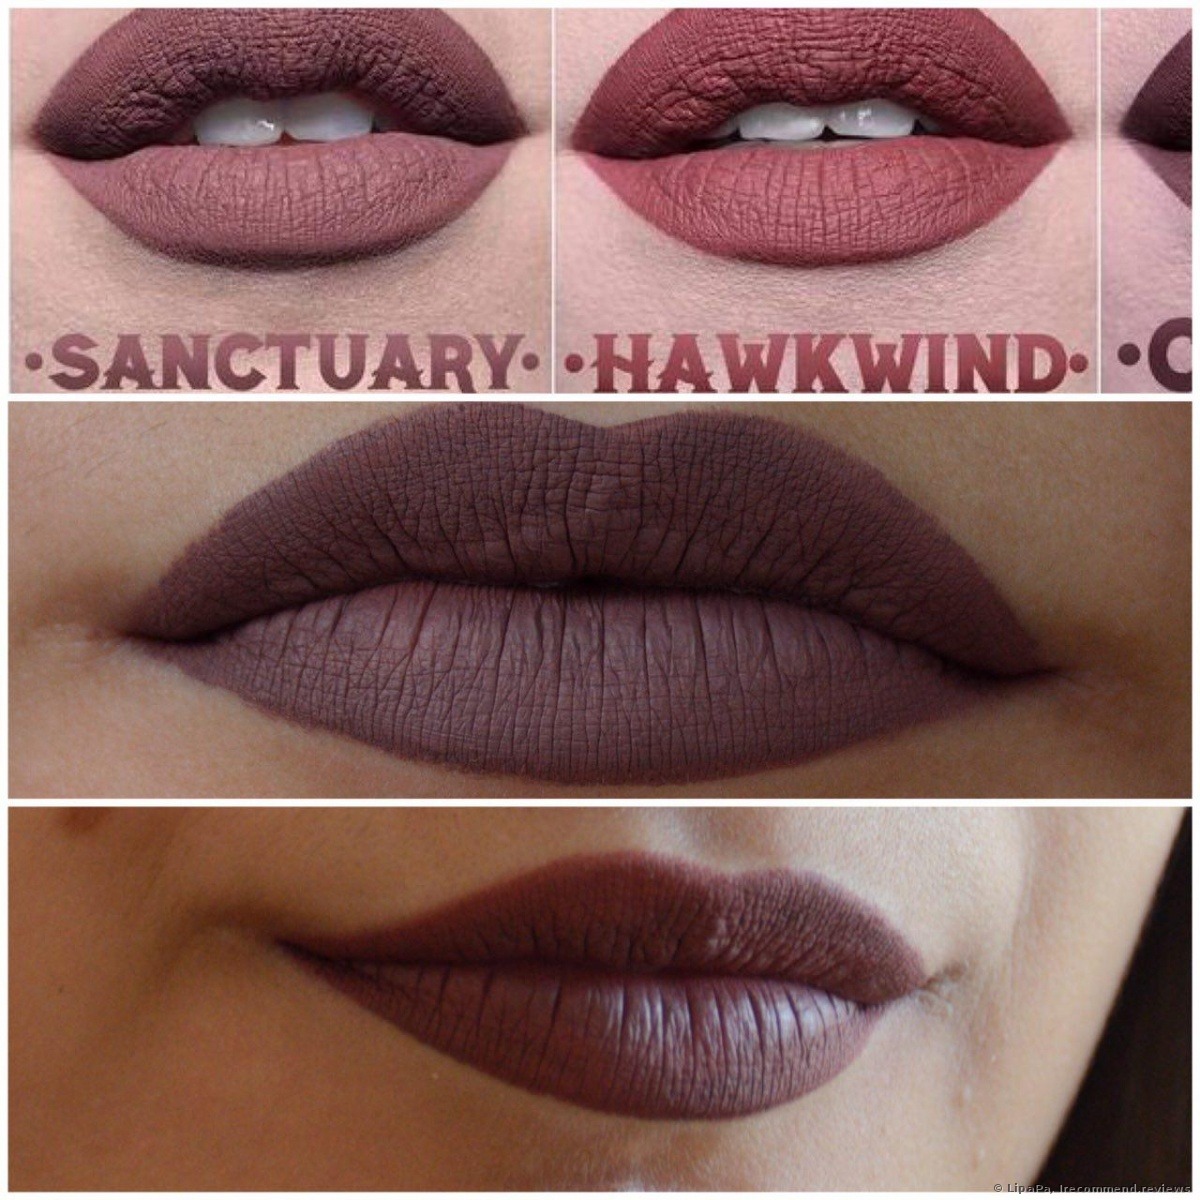 Halvtreds Anklage Diskutere Kat Von D Everlasting Liquid Lipstick - «Disappointment and admiration. No  staying power, sheer coverage yet smooth application. Hawkwind and Sanctuary,  I'm so confused about both of them» | Consumer reviews